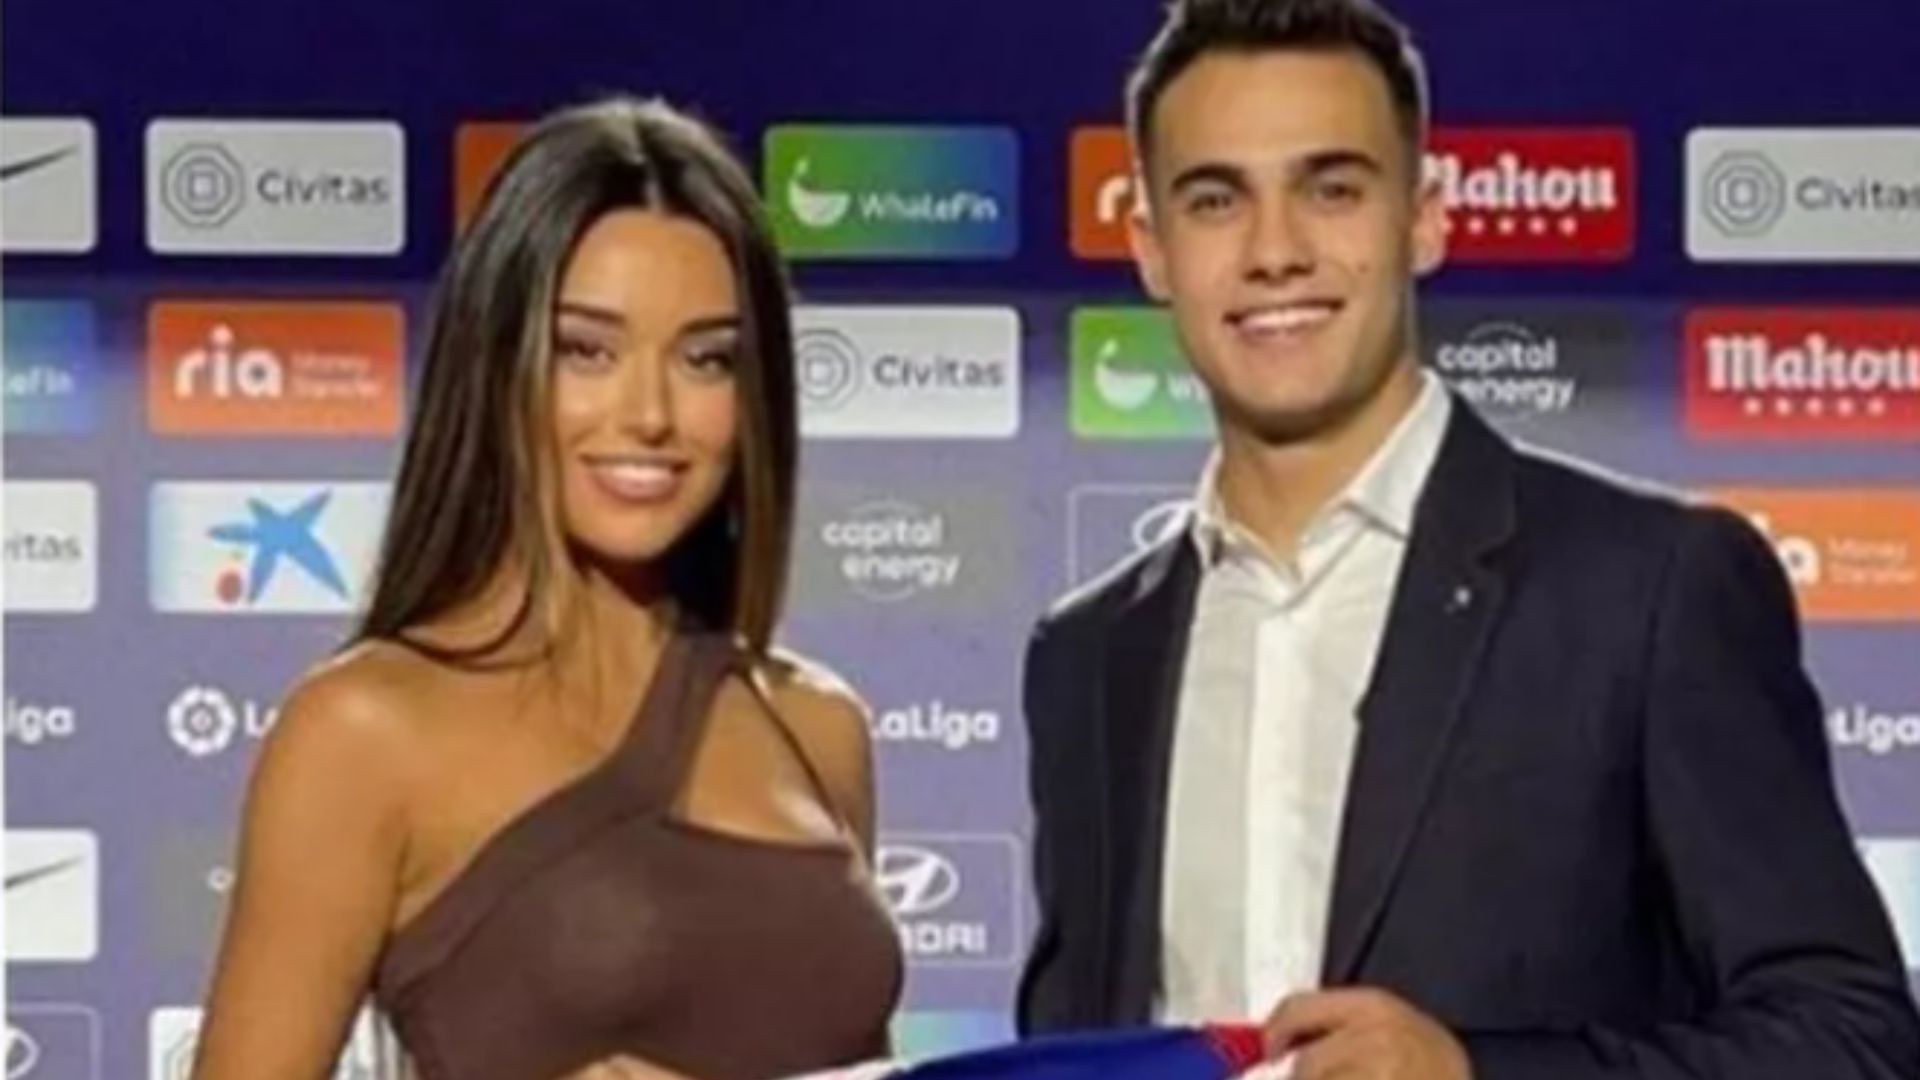 Sergio Reguilon Girlfriend: He Is Set To Sign For Manchester United